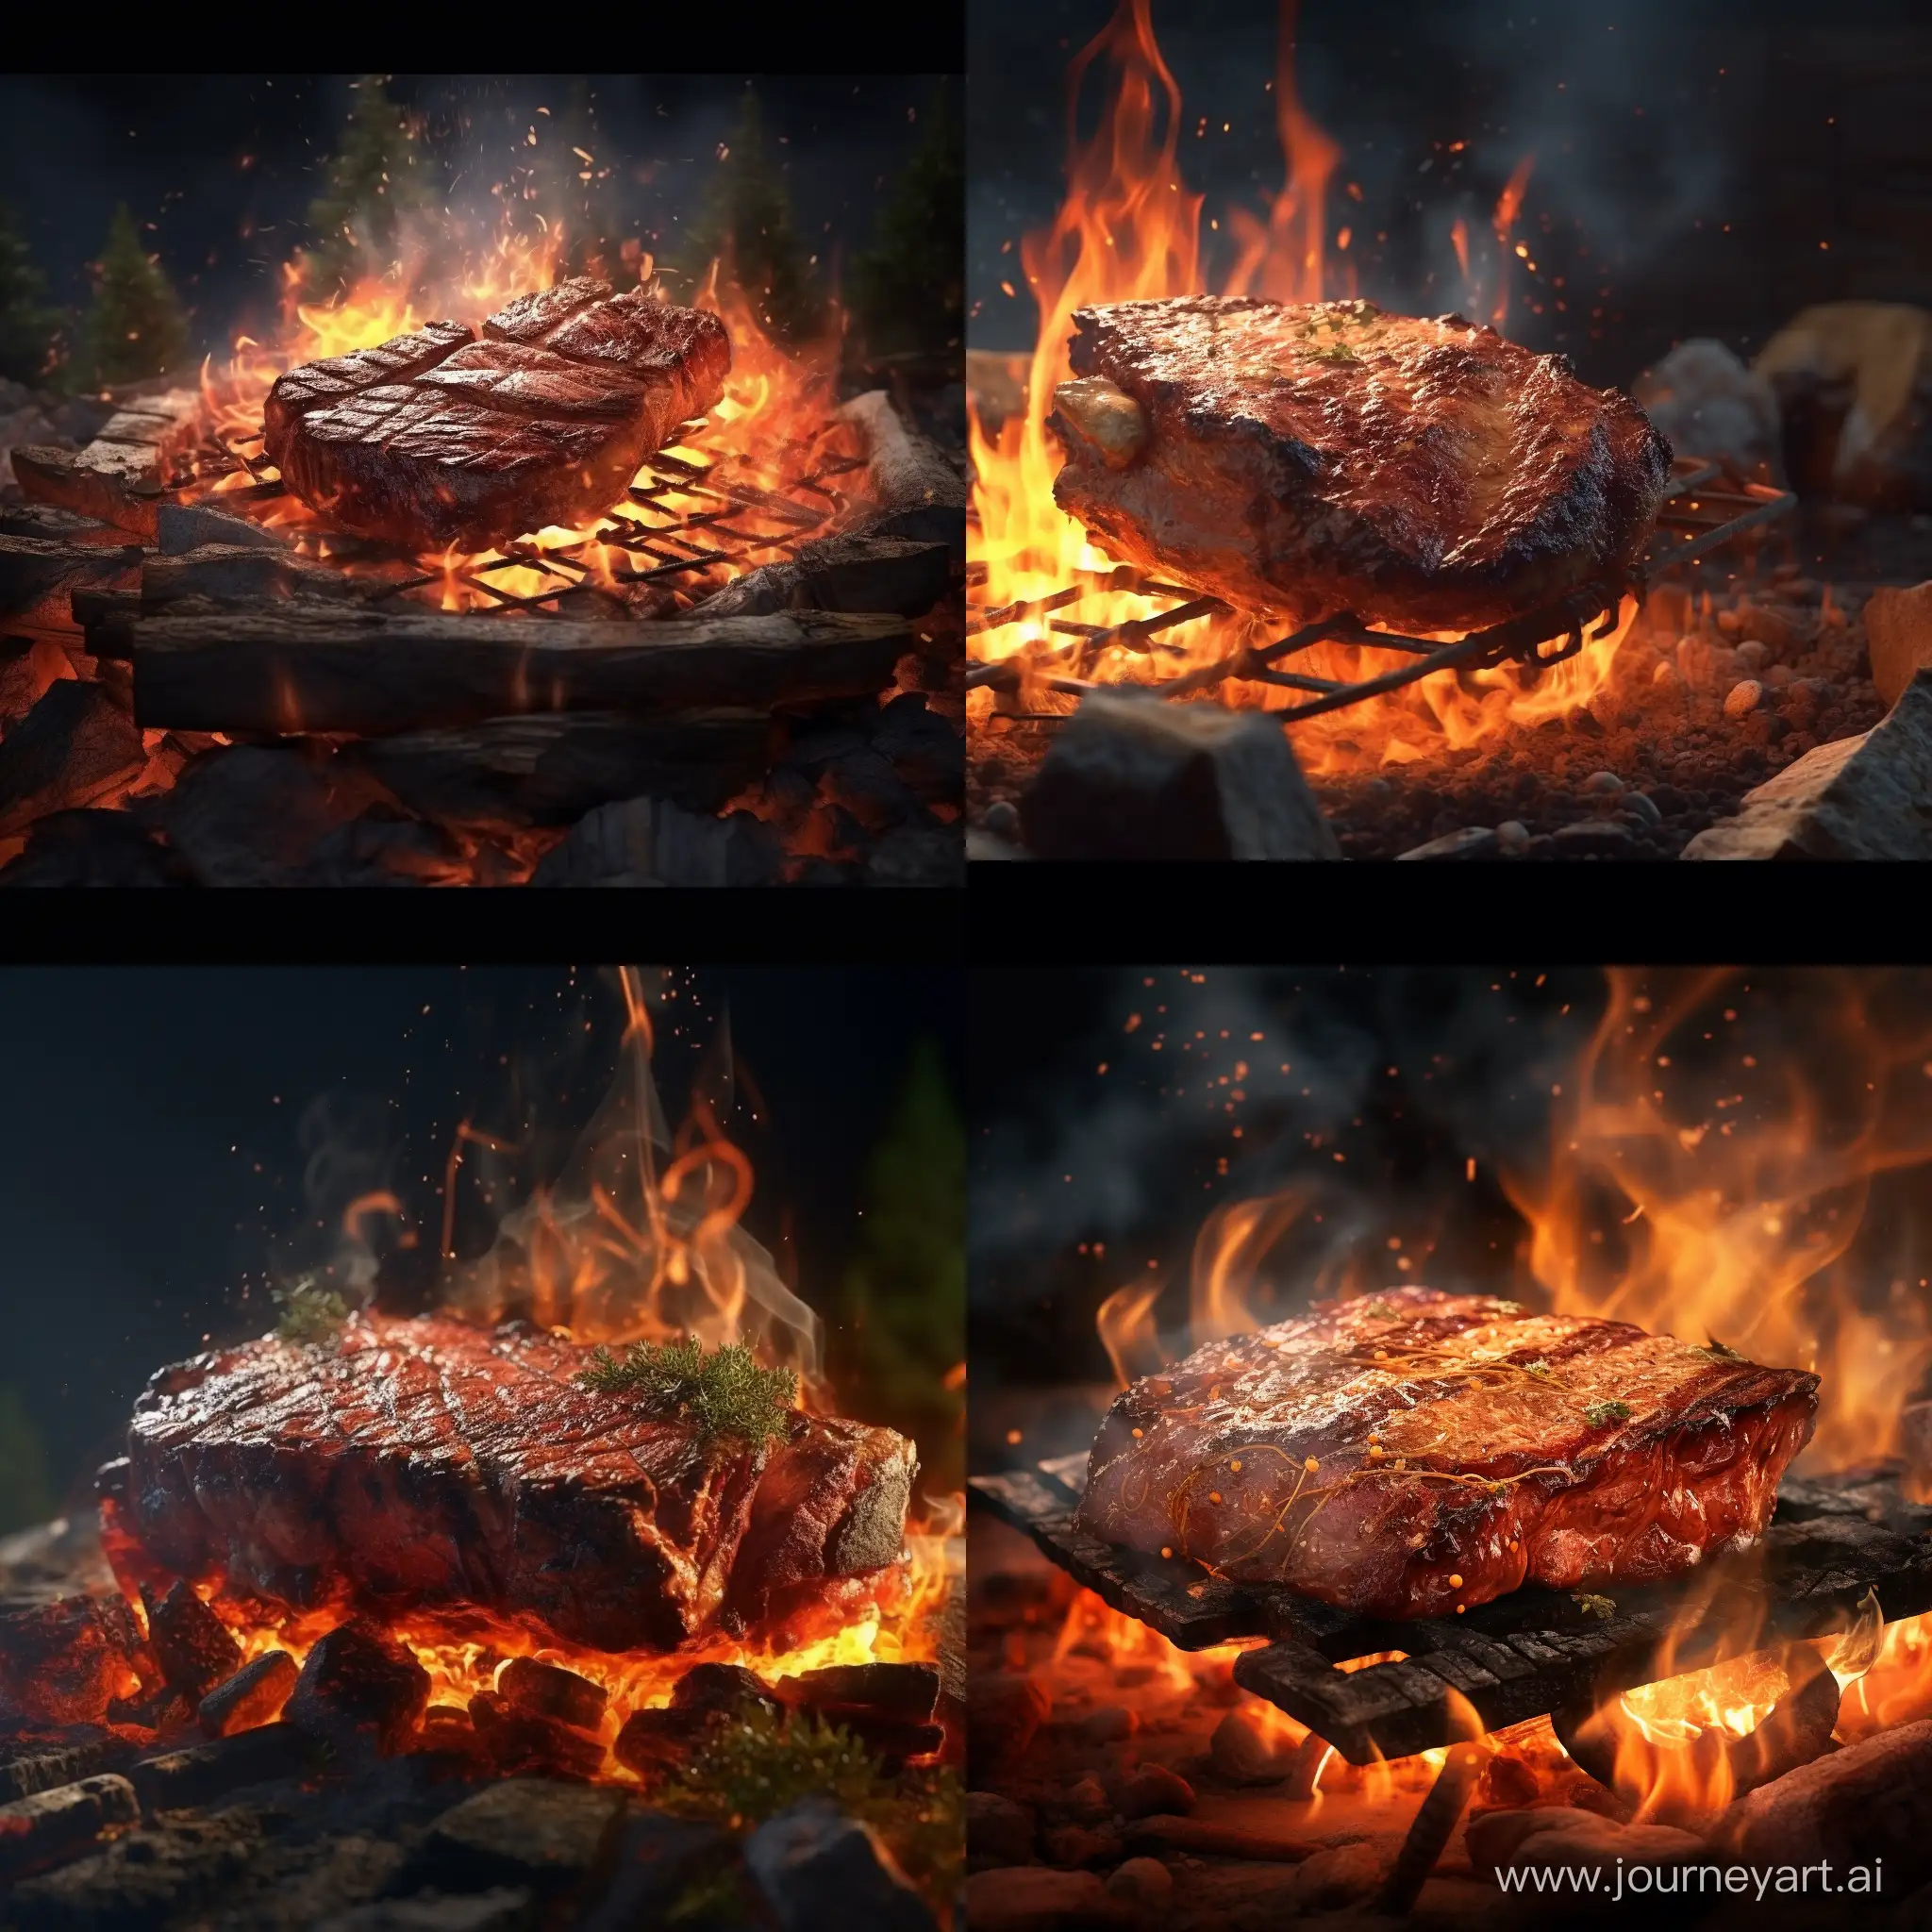 Sizzling-3D-Animation-Juicy-Meat-Roasting-Over-an-Open-Flame